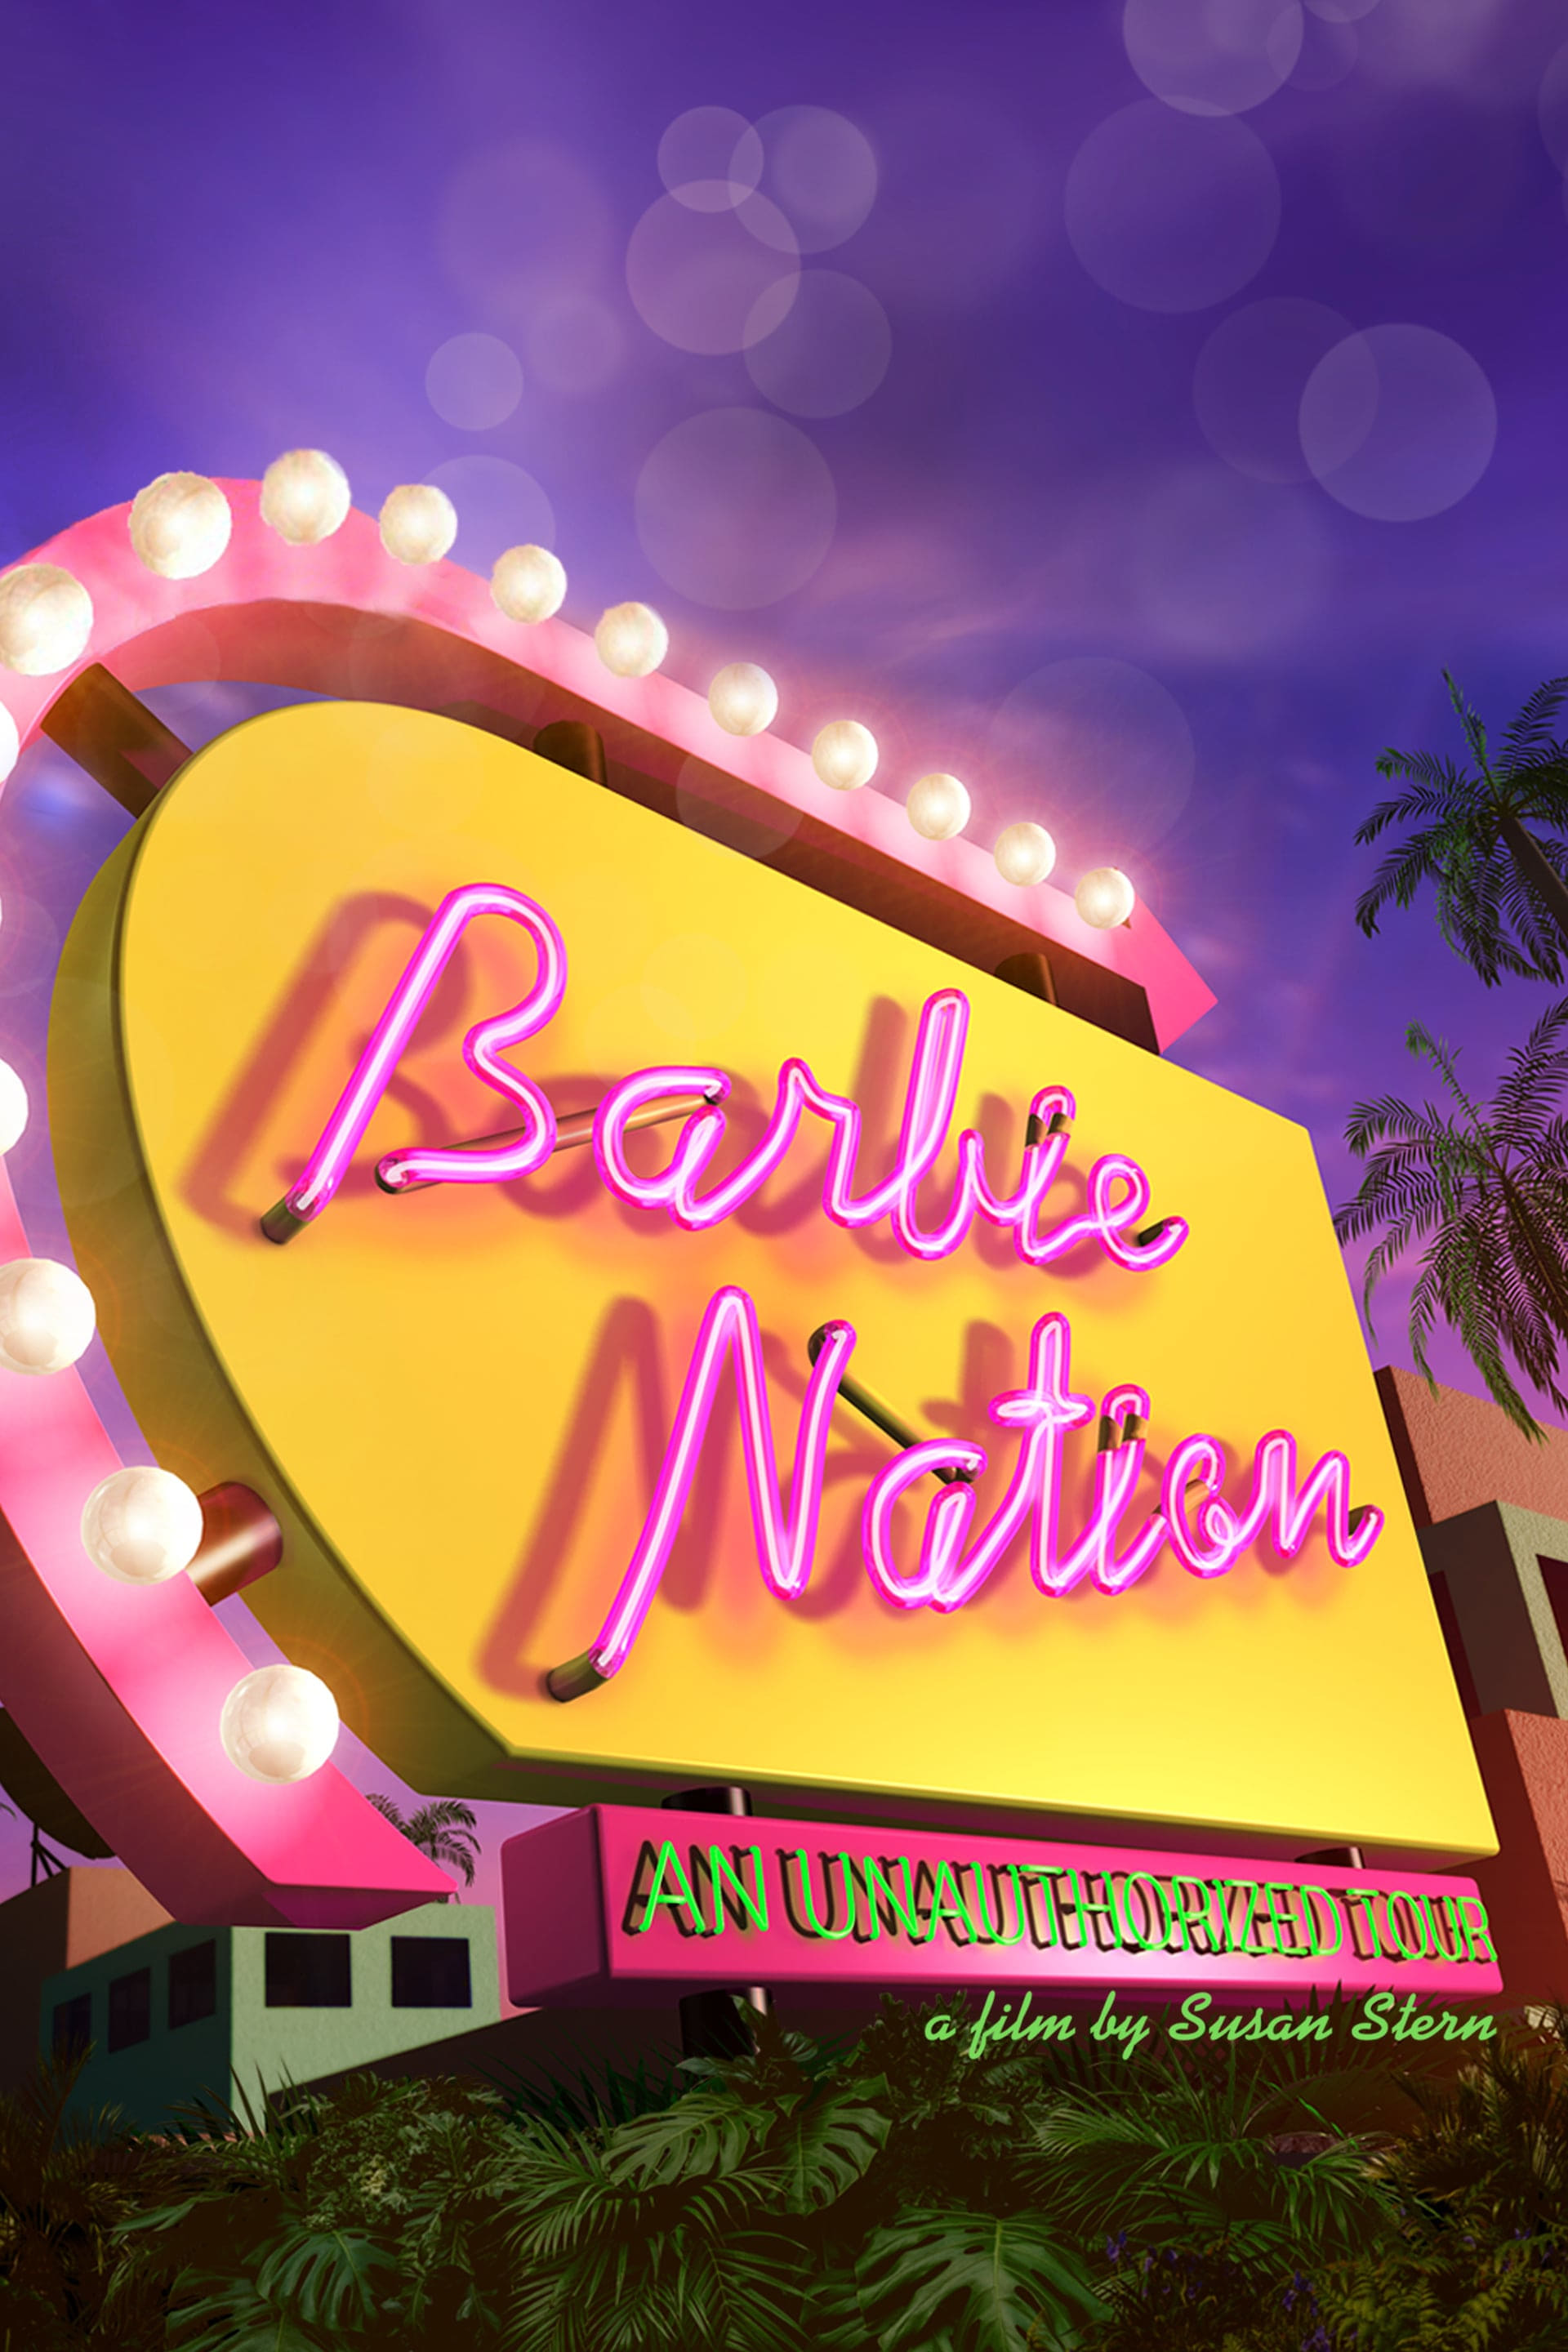 Barbie Nation: An Unauthorized Tour